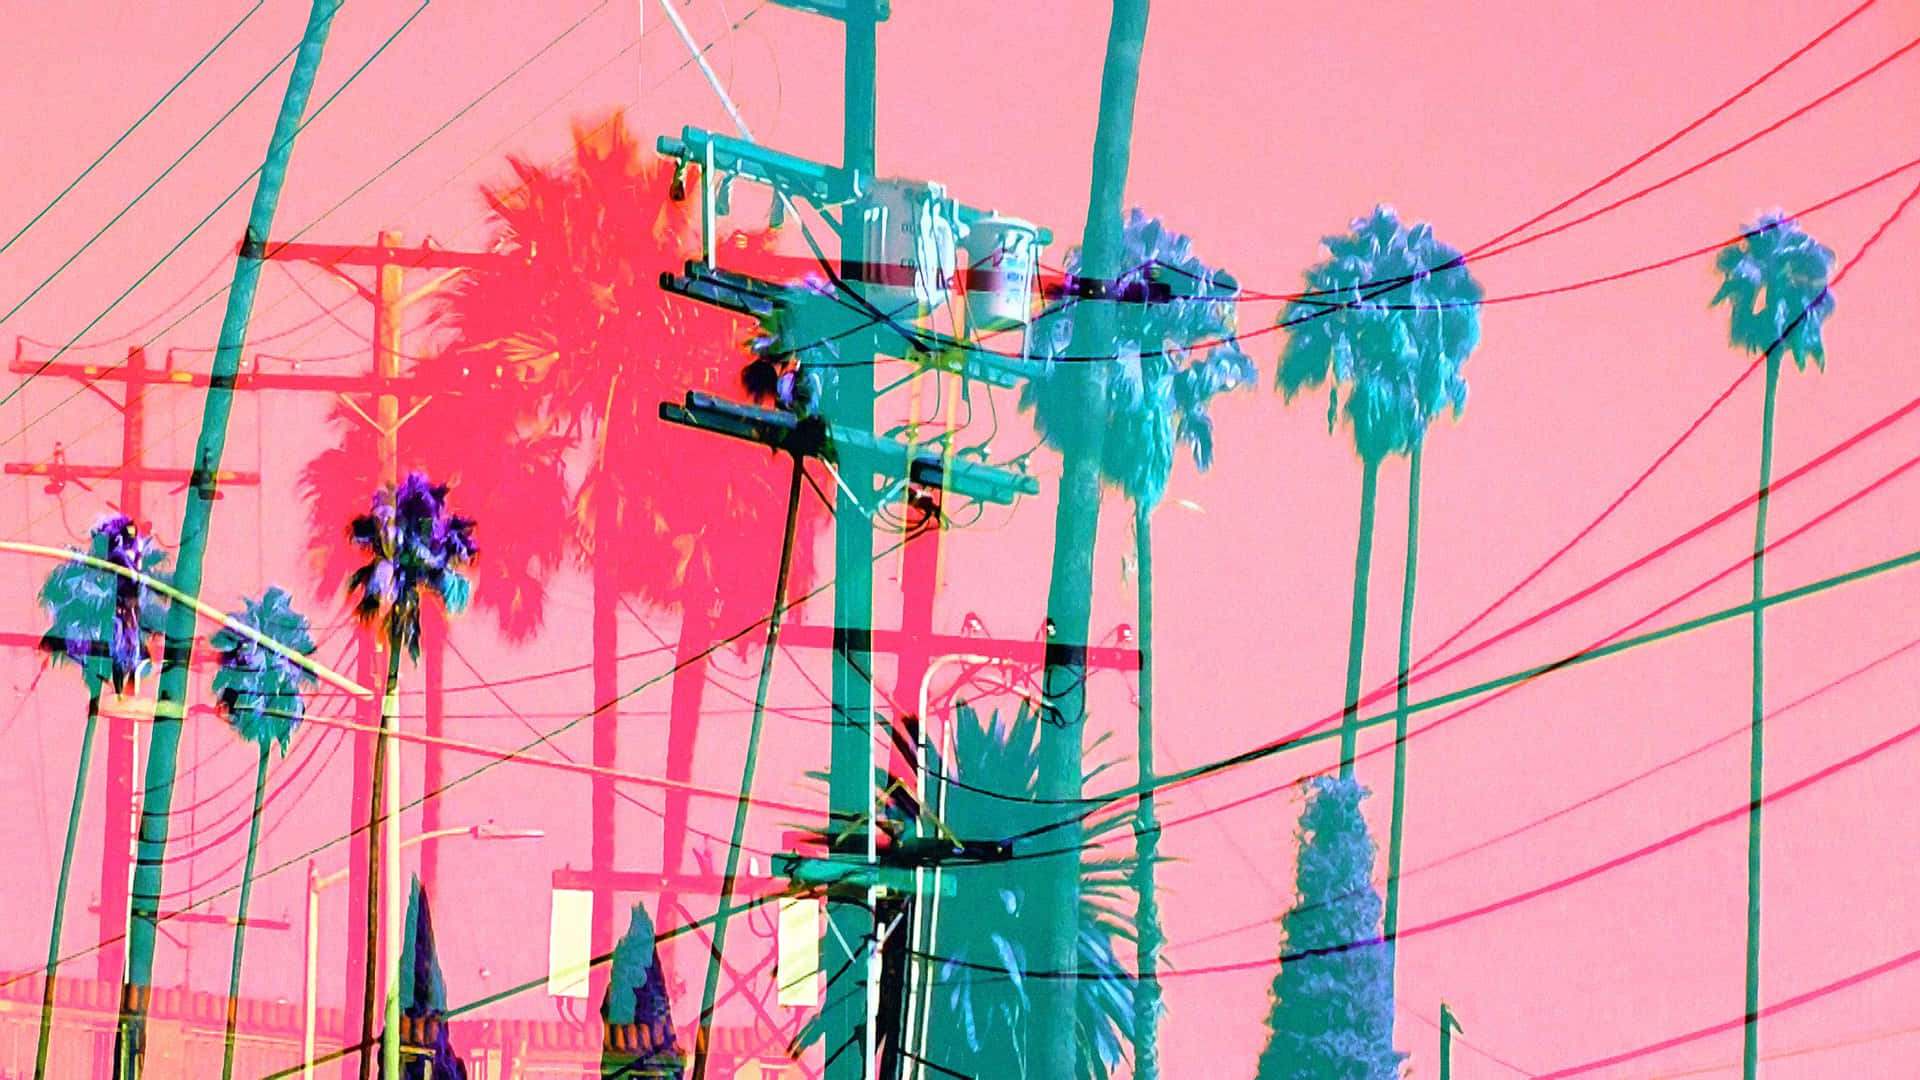 A Photo Of A Street With Palm Trees And Power Lines